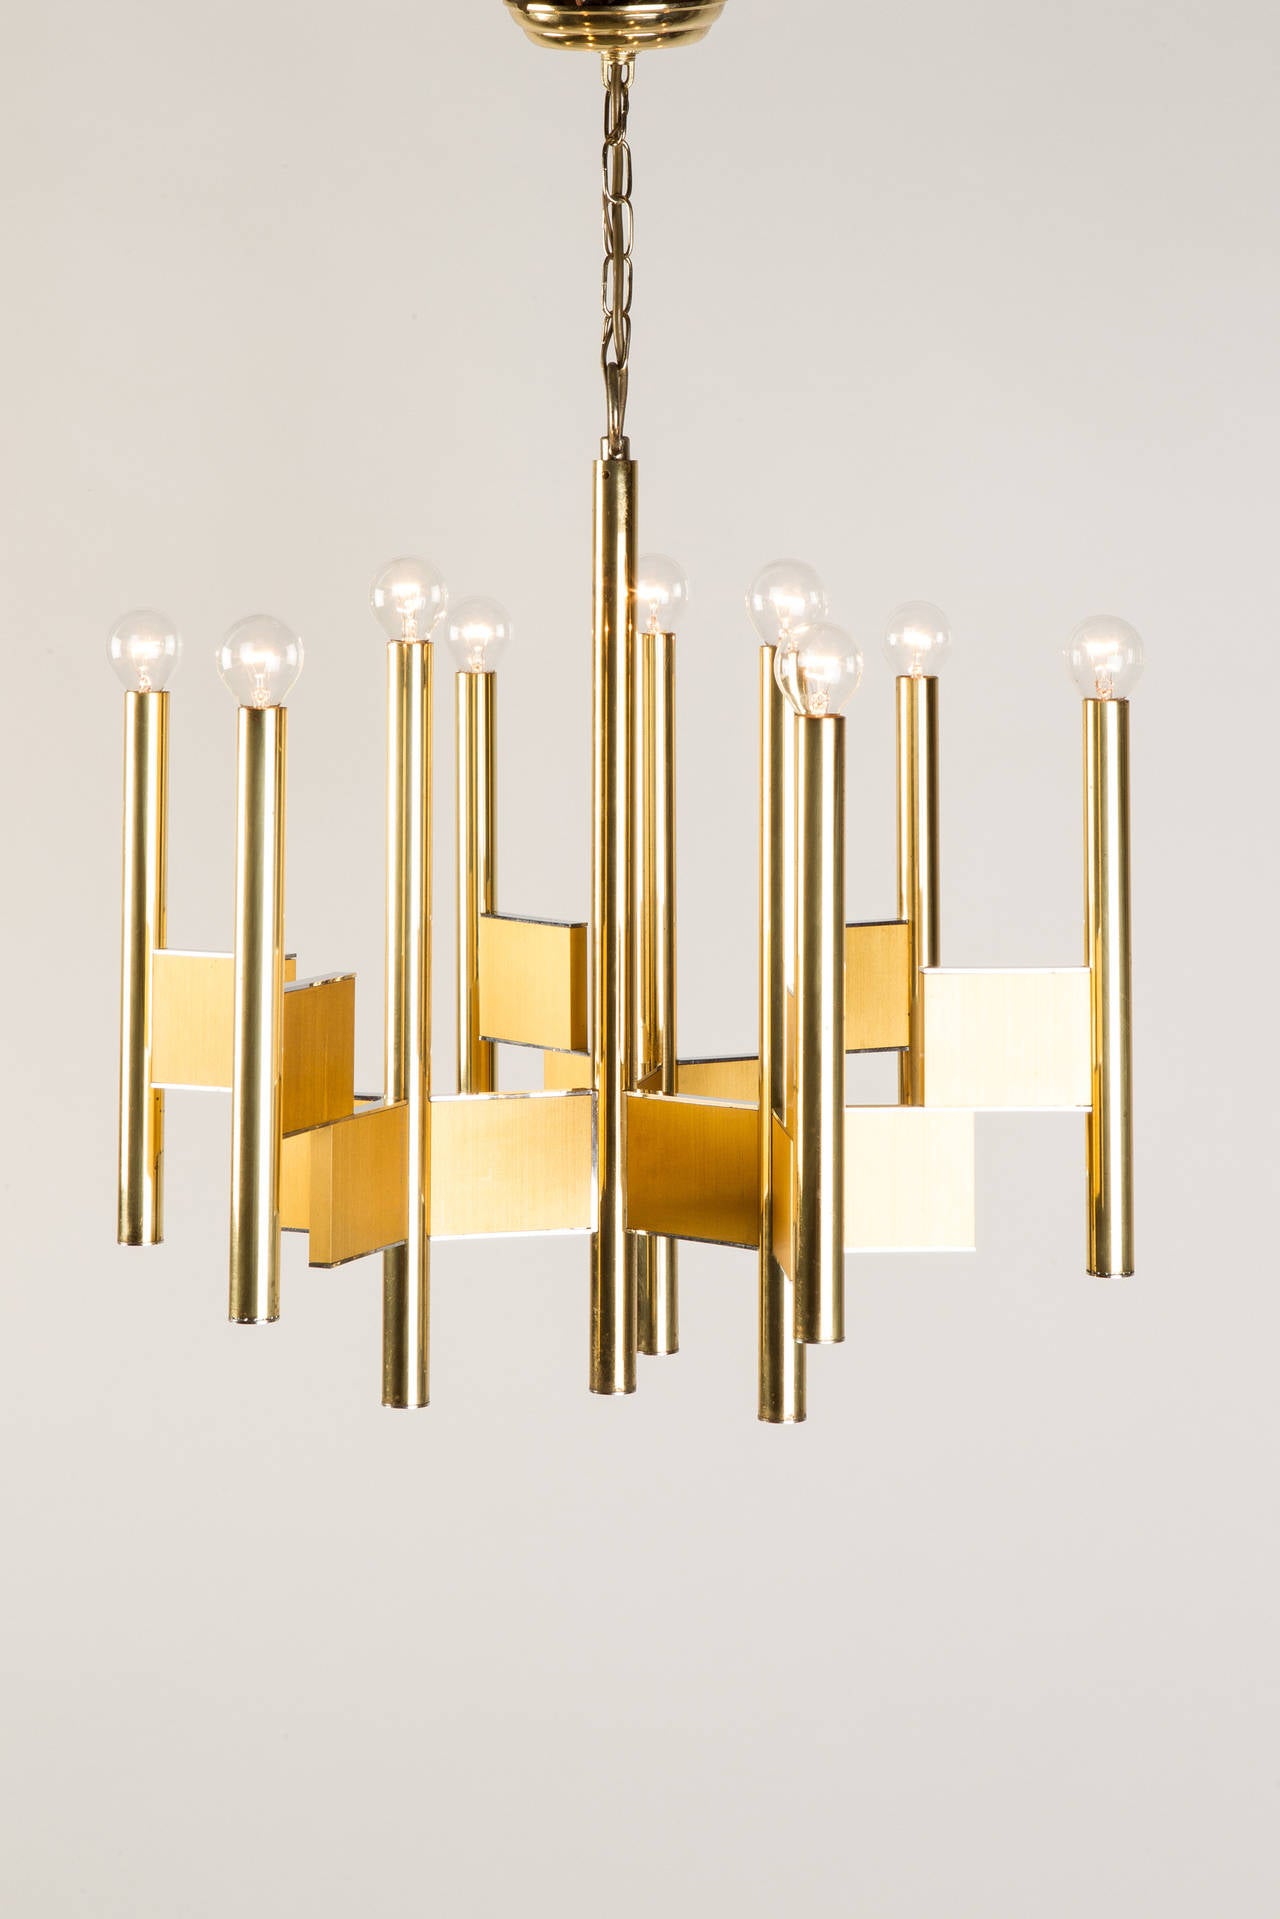 Italian brass chandelier by Gaetano Sciolari, made in Italy in the 1970s by Sciolari. Very sculptural form, the brass plates have chromed edges